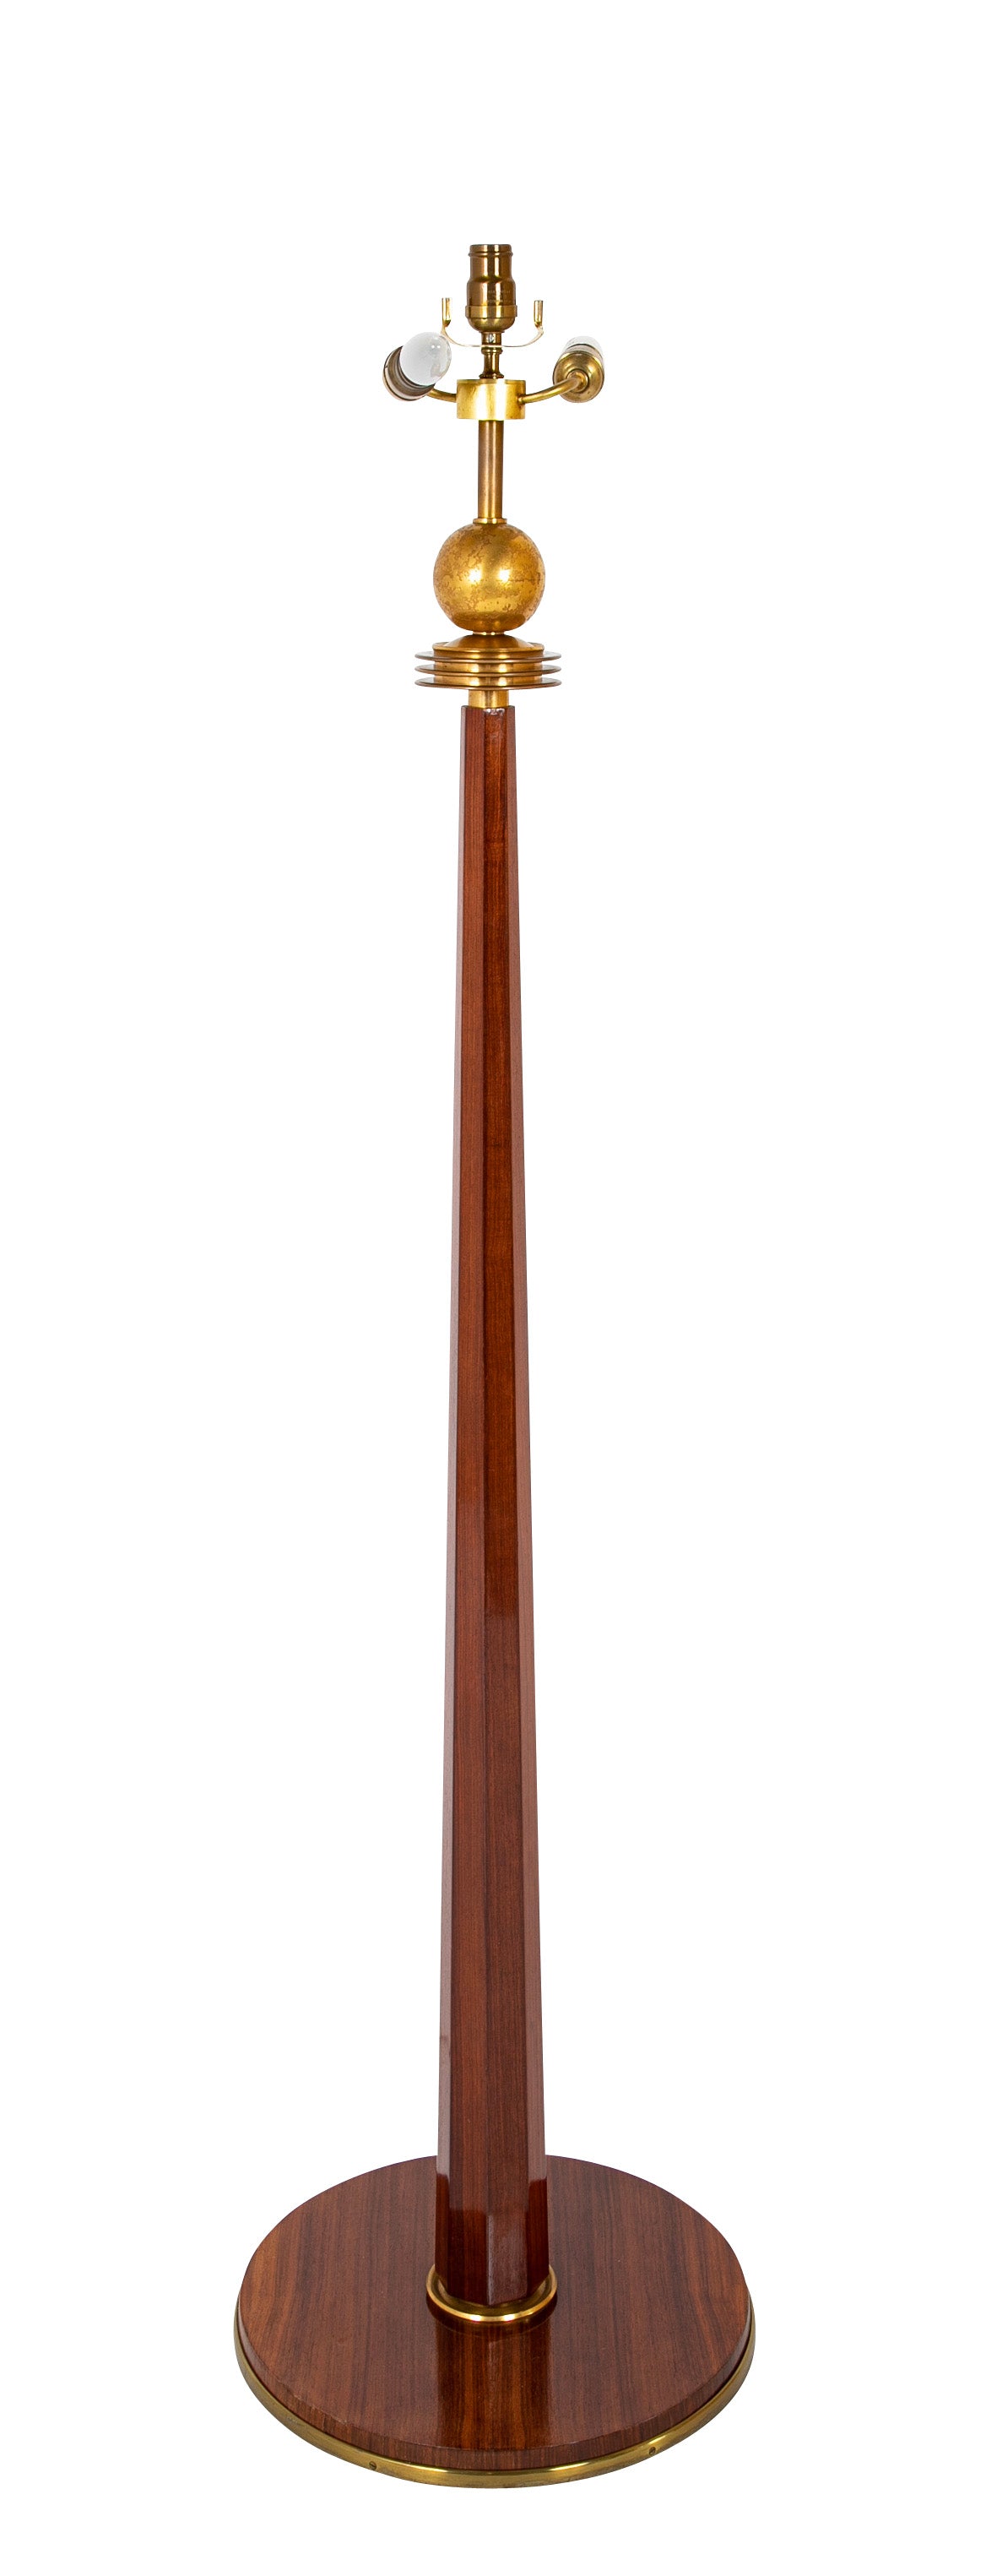 Mahogany Floor Lamp Attributted To Dominique.